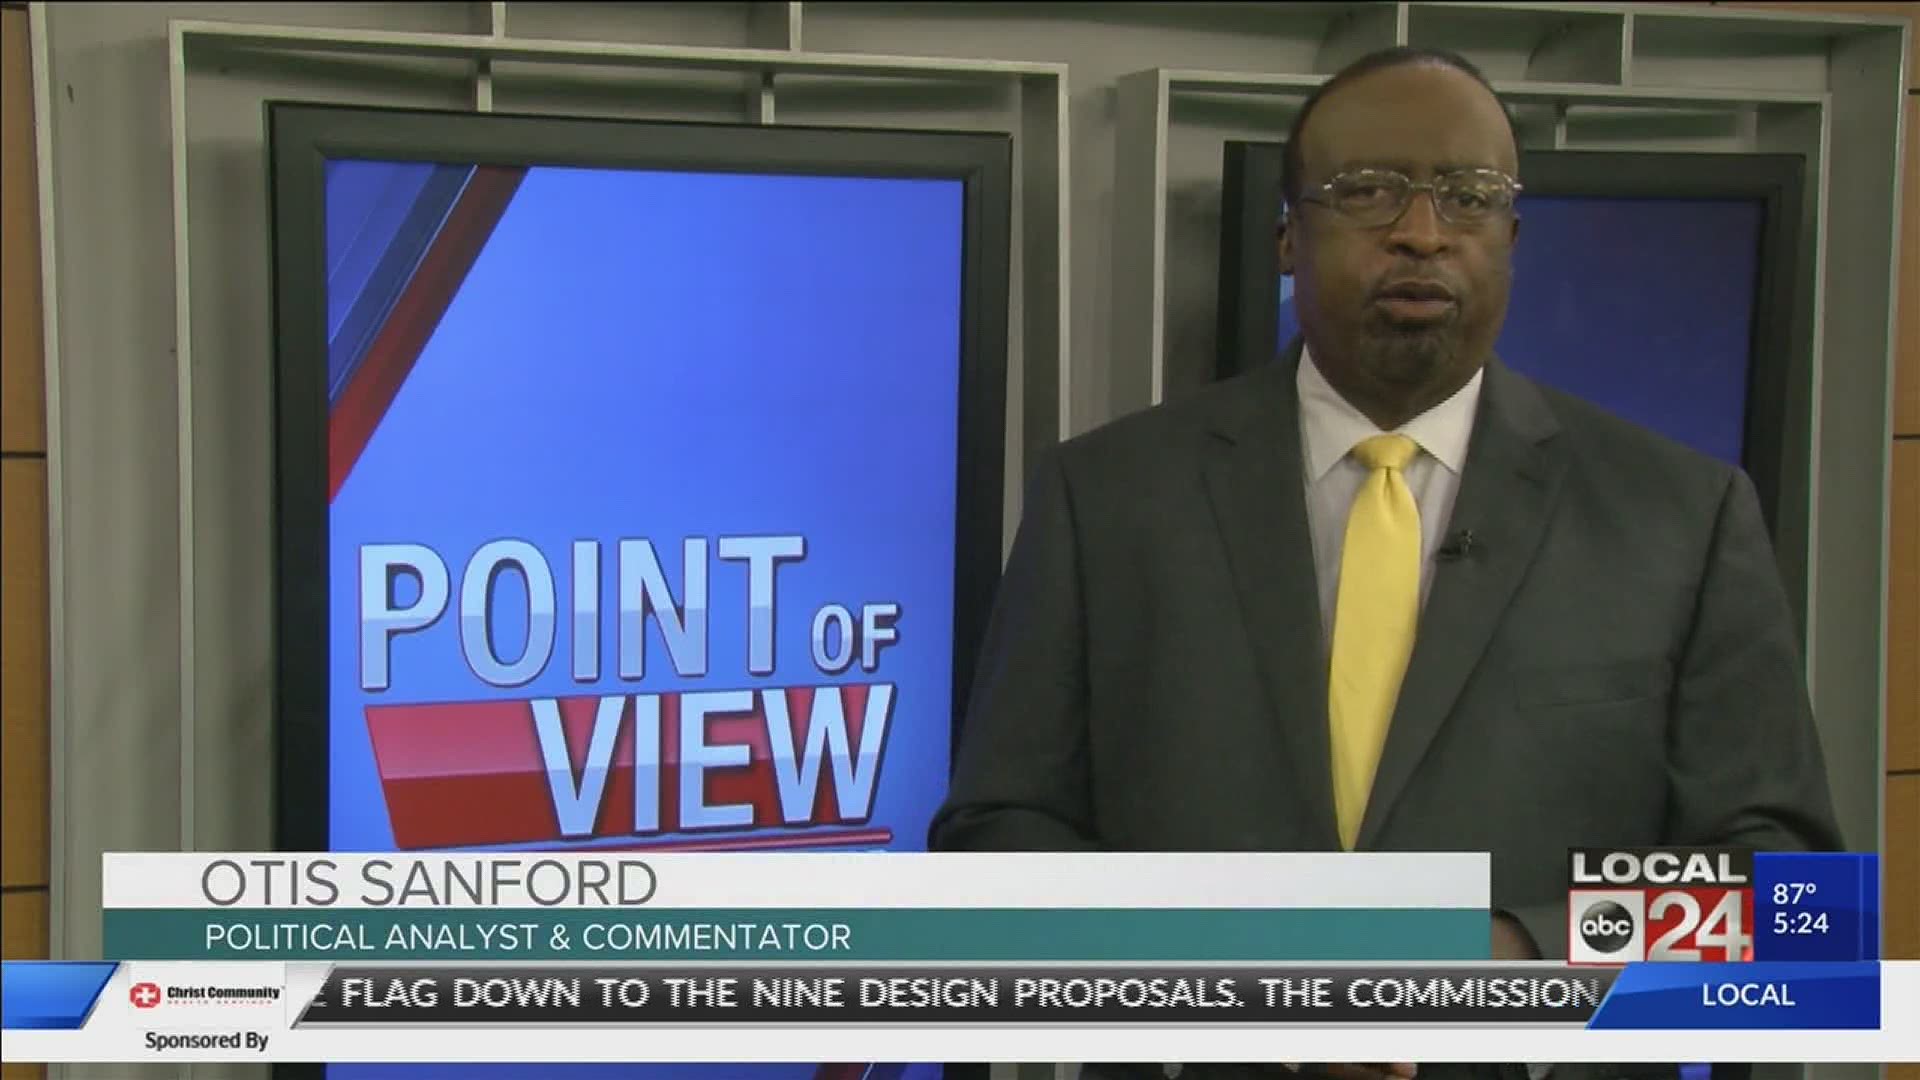 Local 24 News political analyst and commentator Otis Sanford shares his point of view on reporting face covering violations.